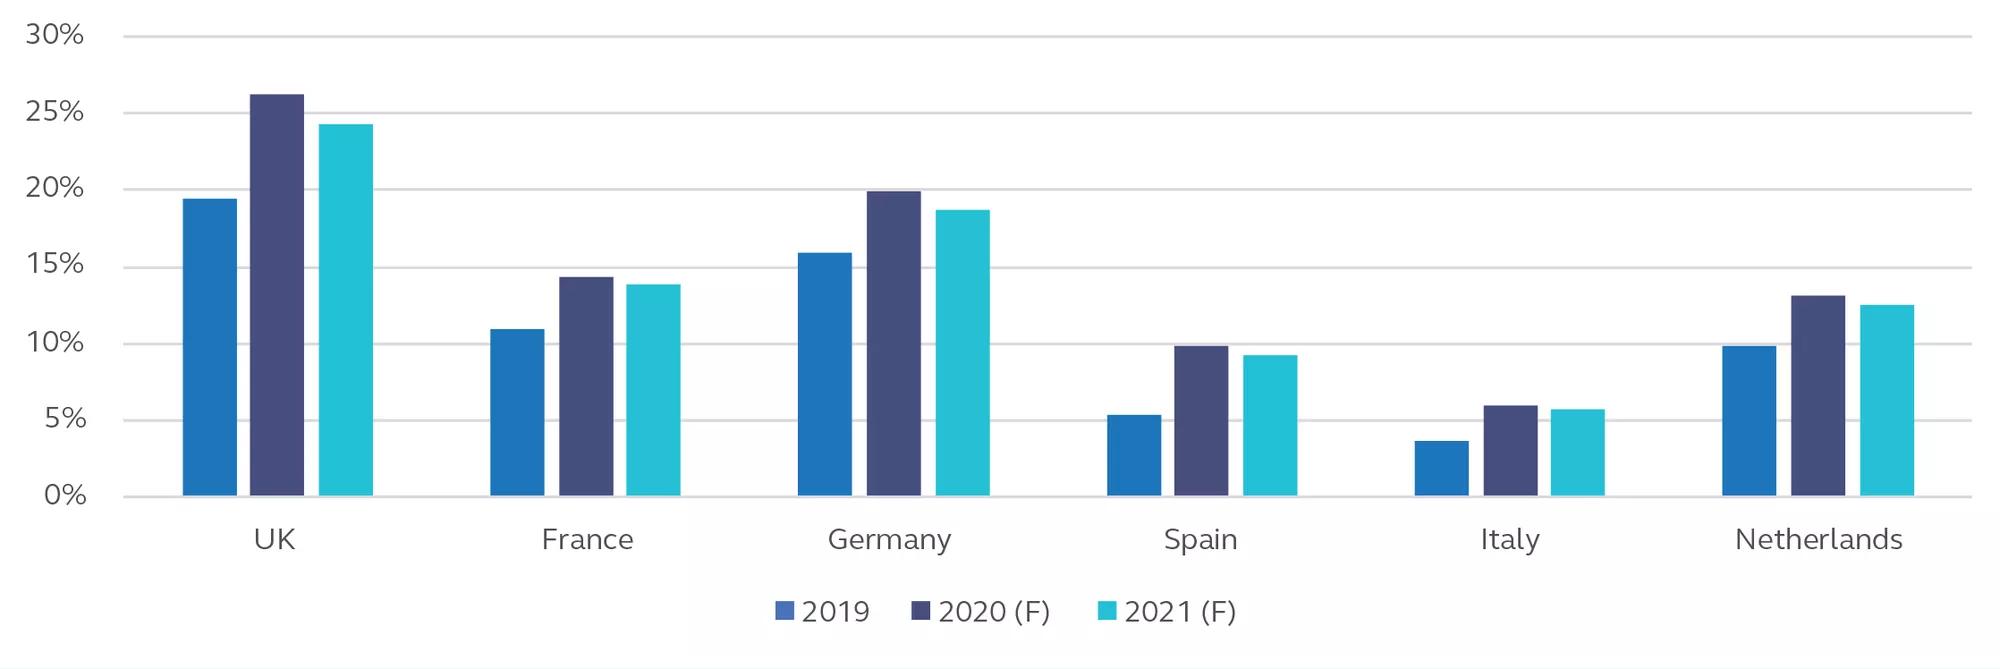 Bar graph showing online retail sales as a % total of retail sales across Europe in 2019, 2020, and 2021 (forecasted) as of July 2020